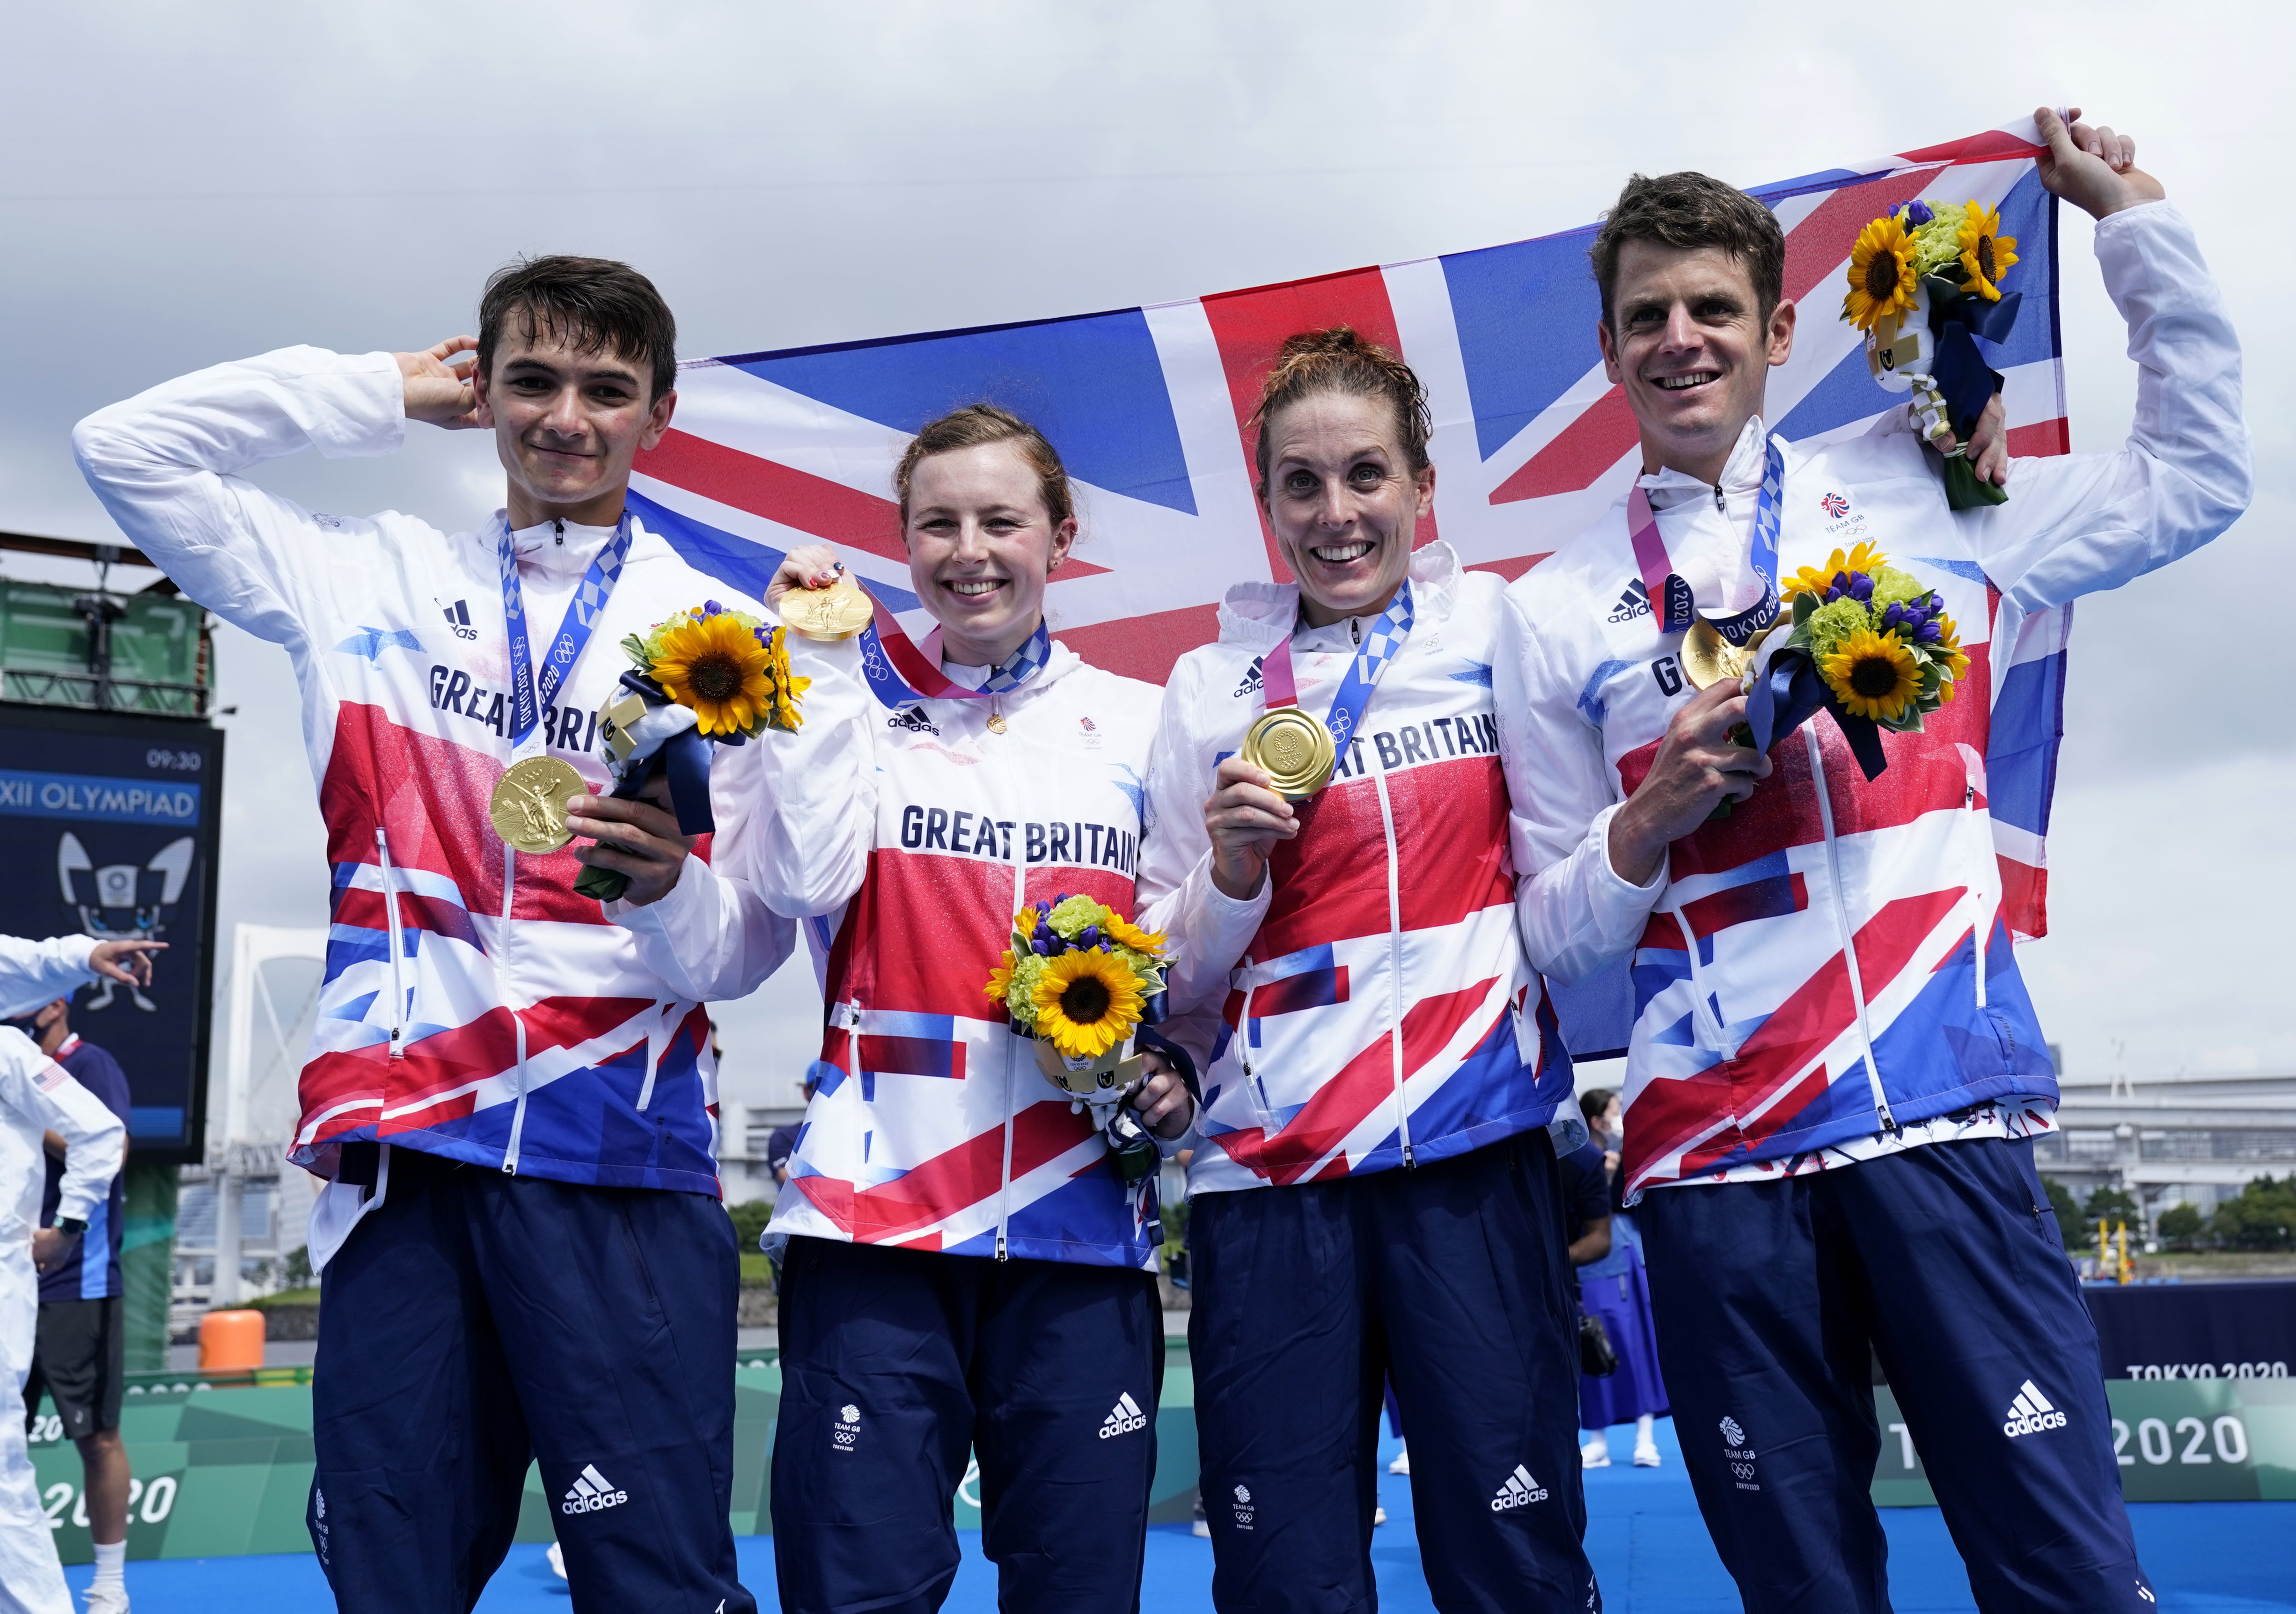 Alex Yee, Georgia Taylor-Brown Jess Learmonth and Jonny Brownlee took gold in Tokyo (Danny Lawson/PA)